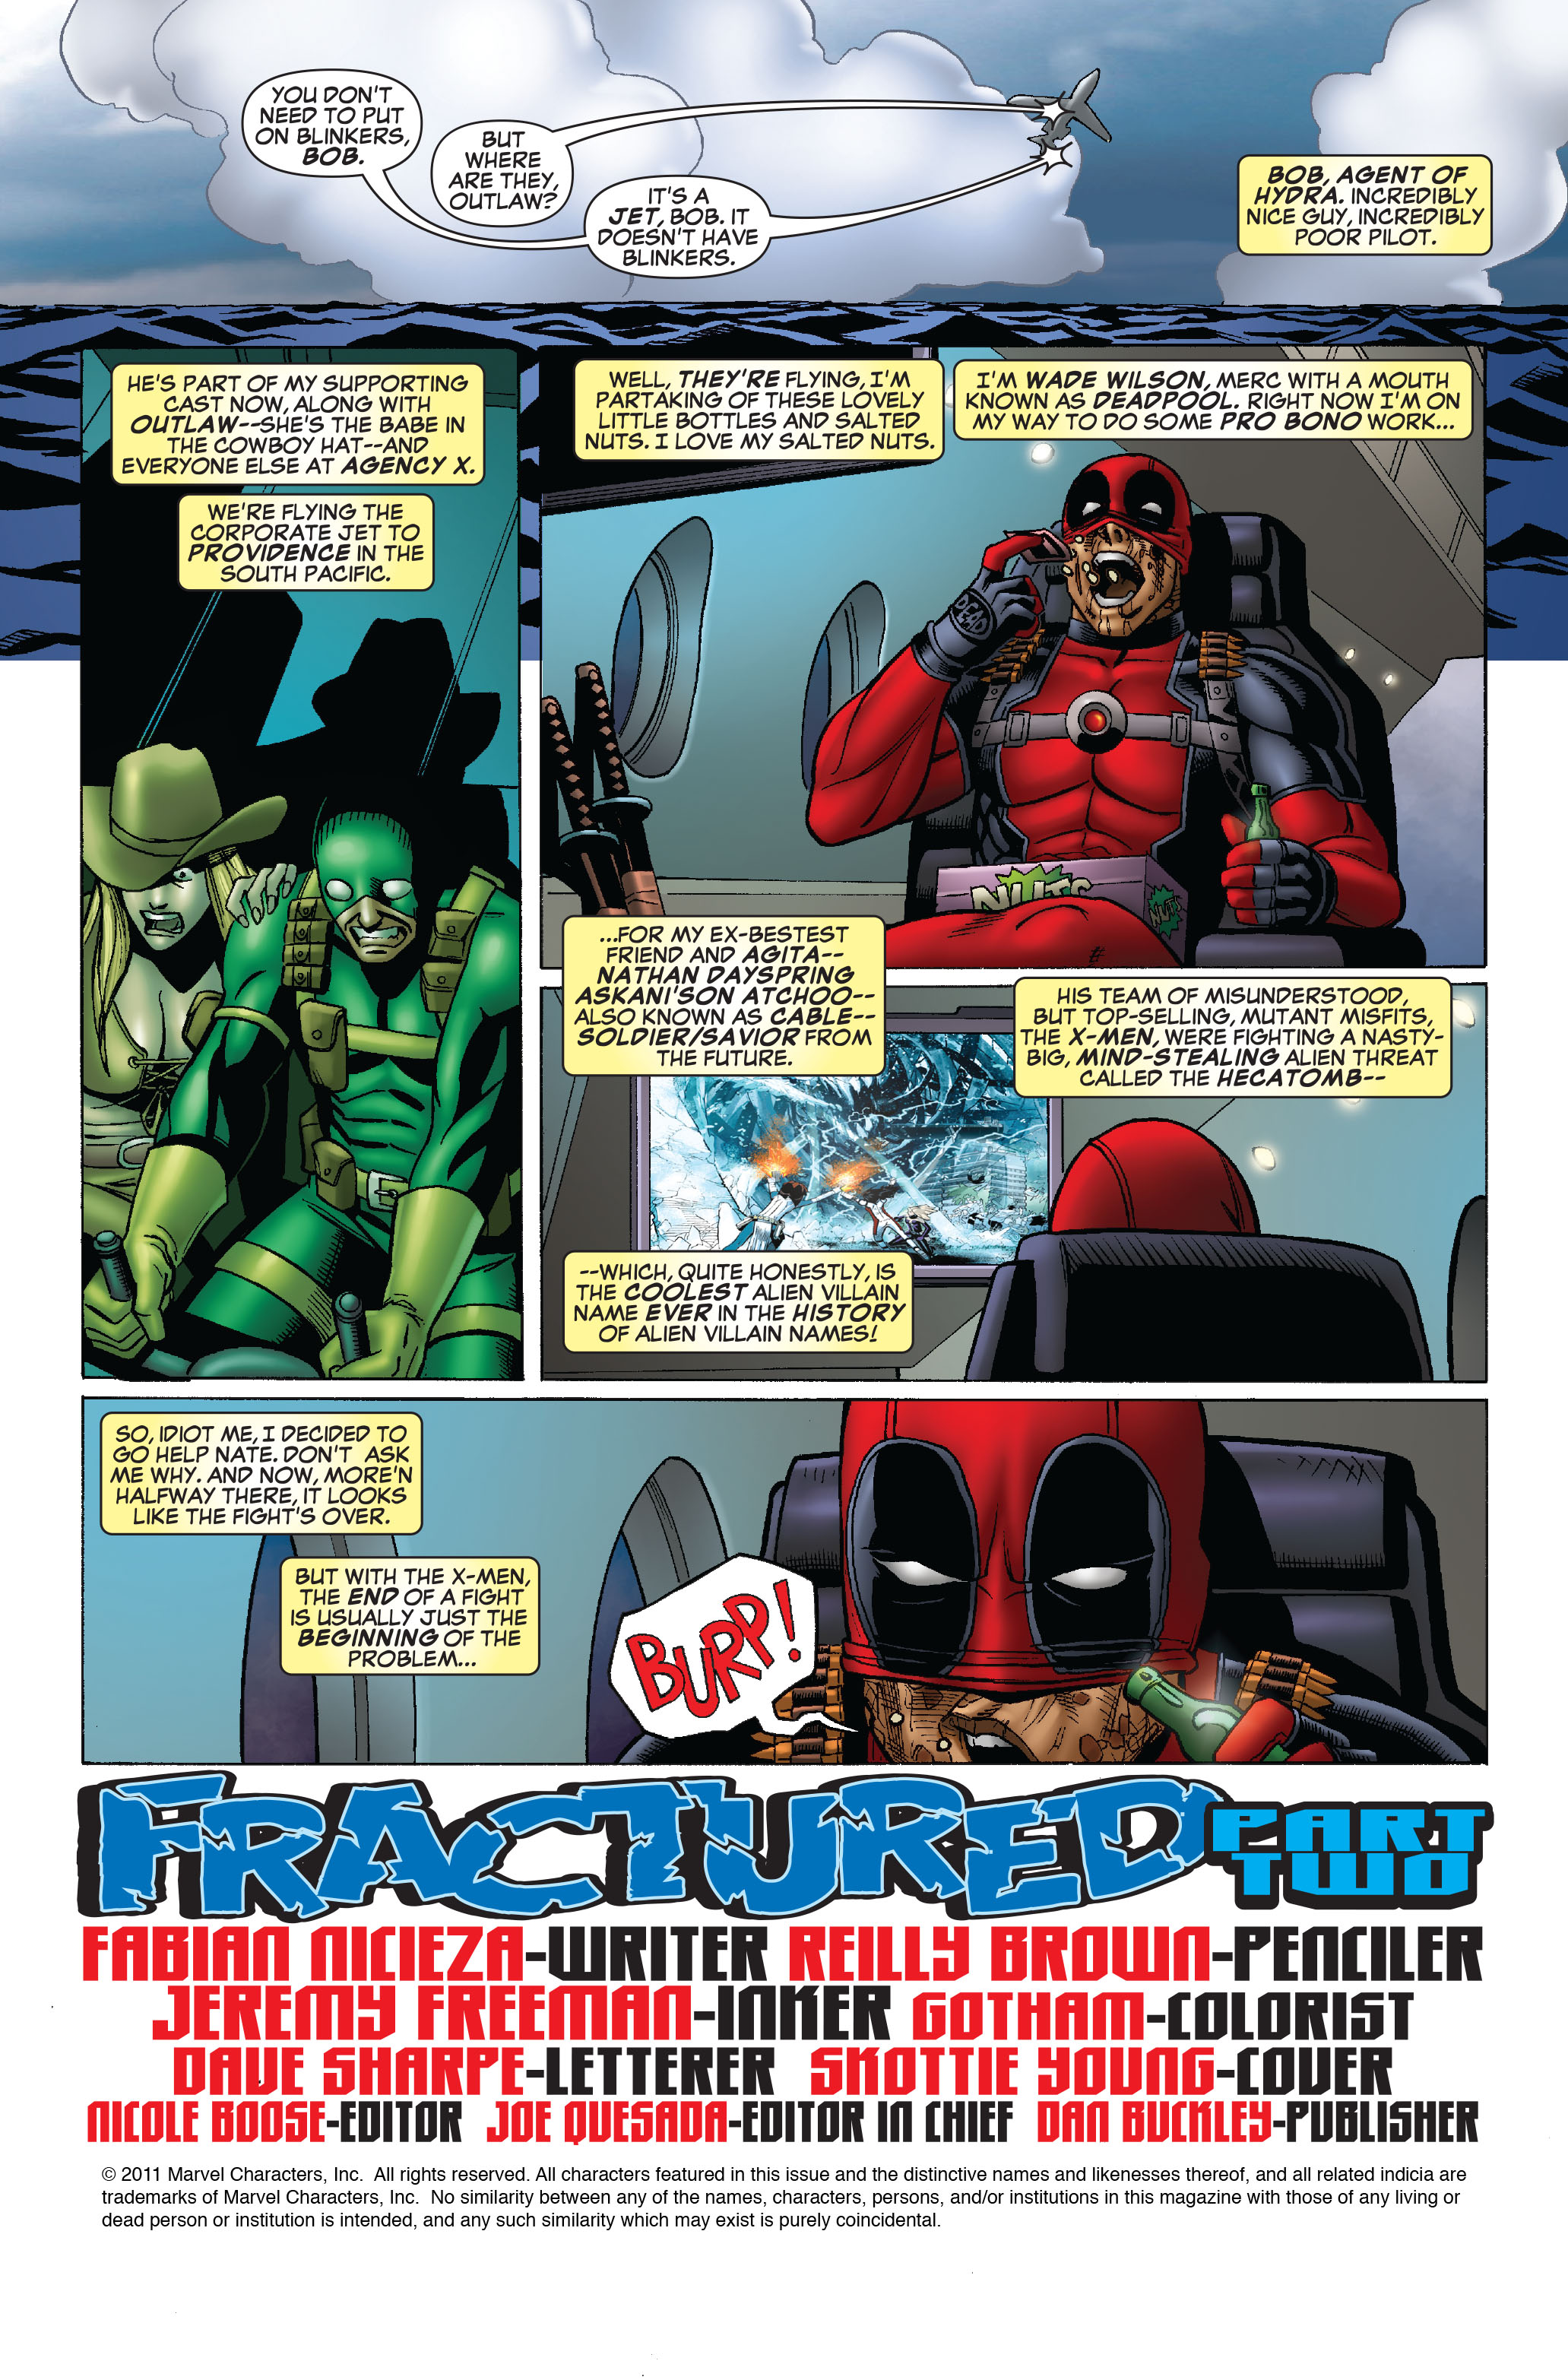 DEADPOOL ISSUE 42 ISSUE 41 & 42 DEADPOOL:SUICIDE KINGS IN STOCK ON 24/3/20 